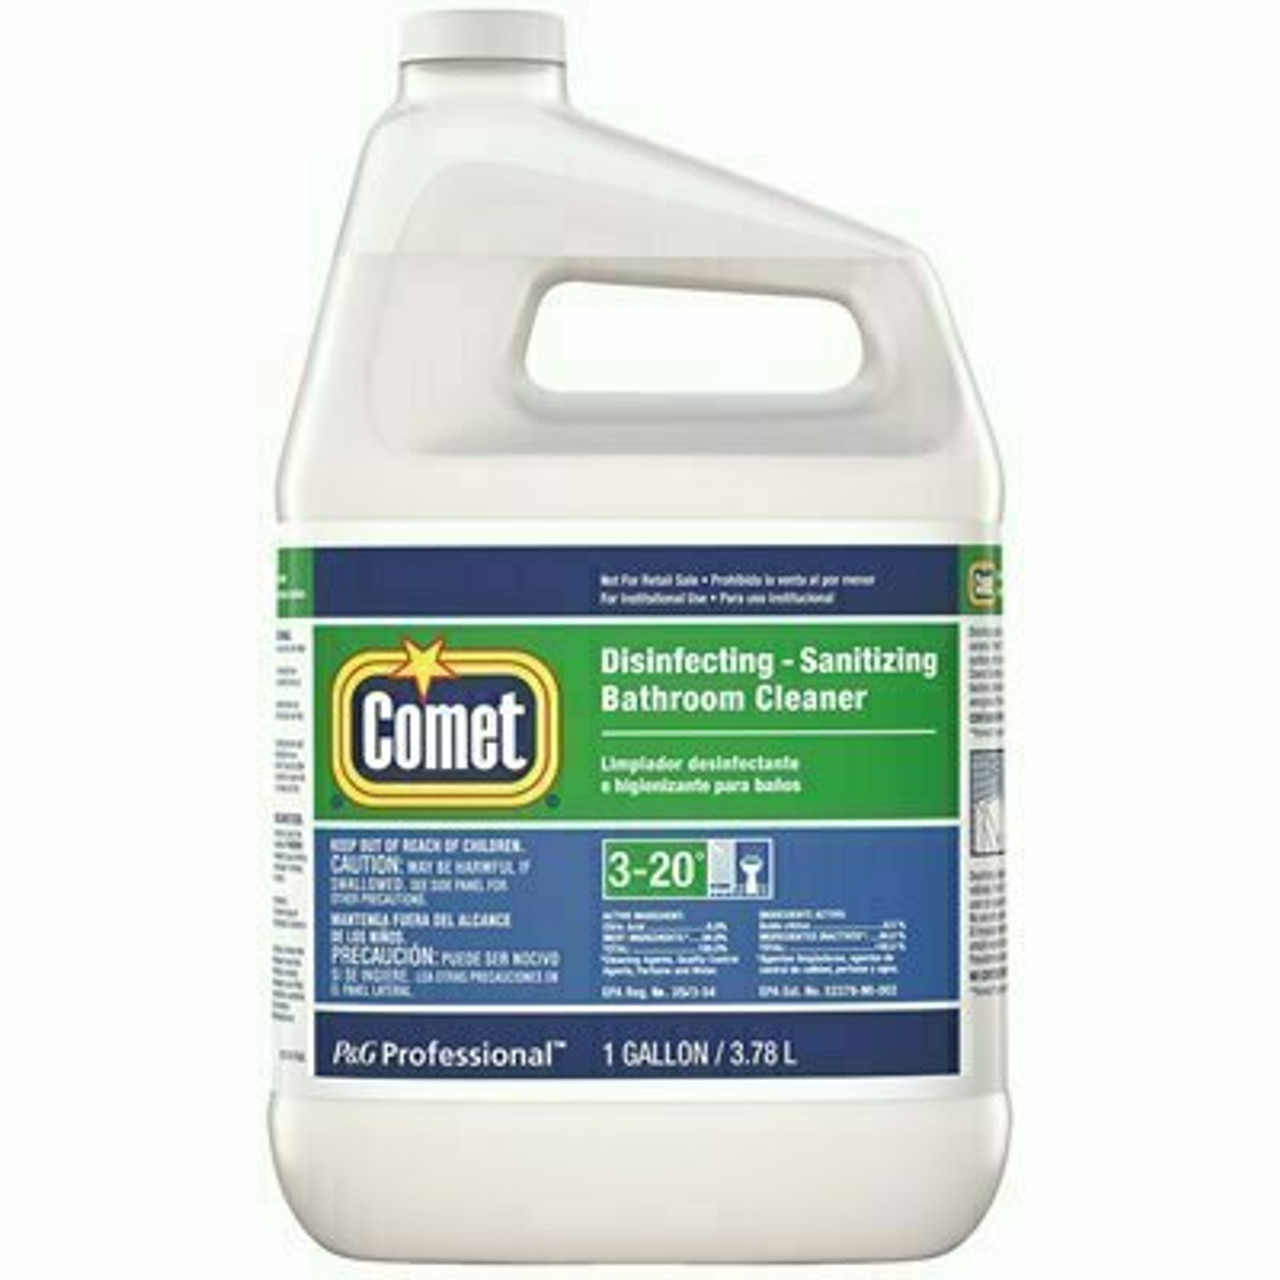 Comet 1 Gal. Open Loop Bath Disinfecting-Sanitizing Liquid Cleaner Refill With Spray Bottle